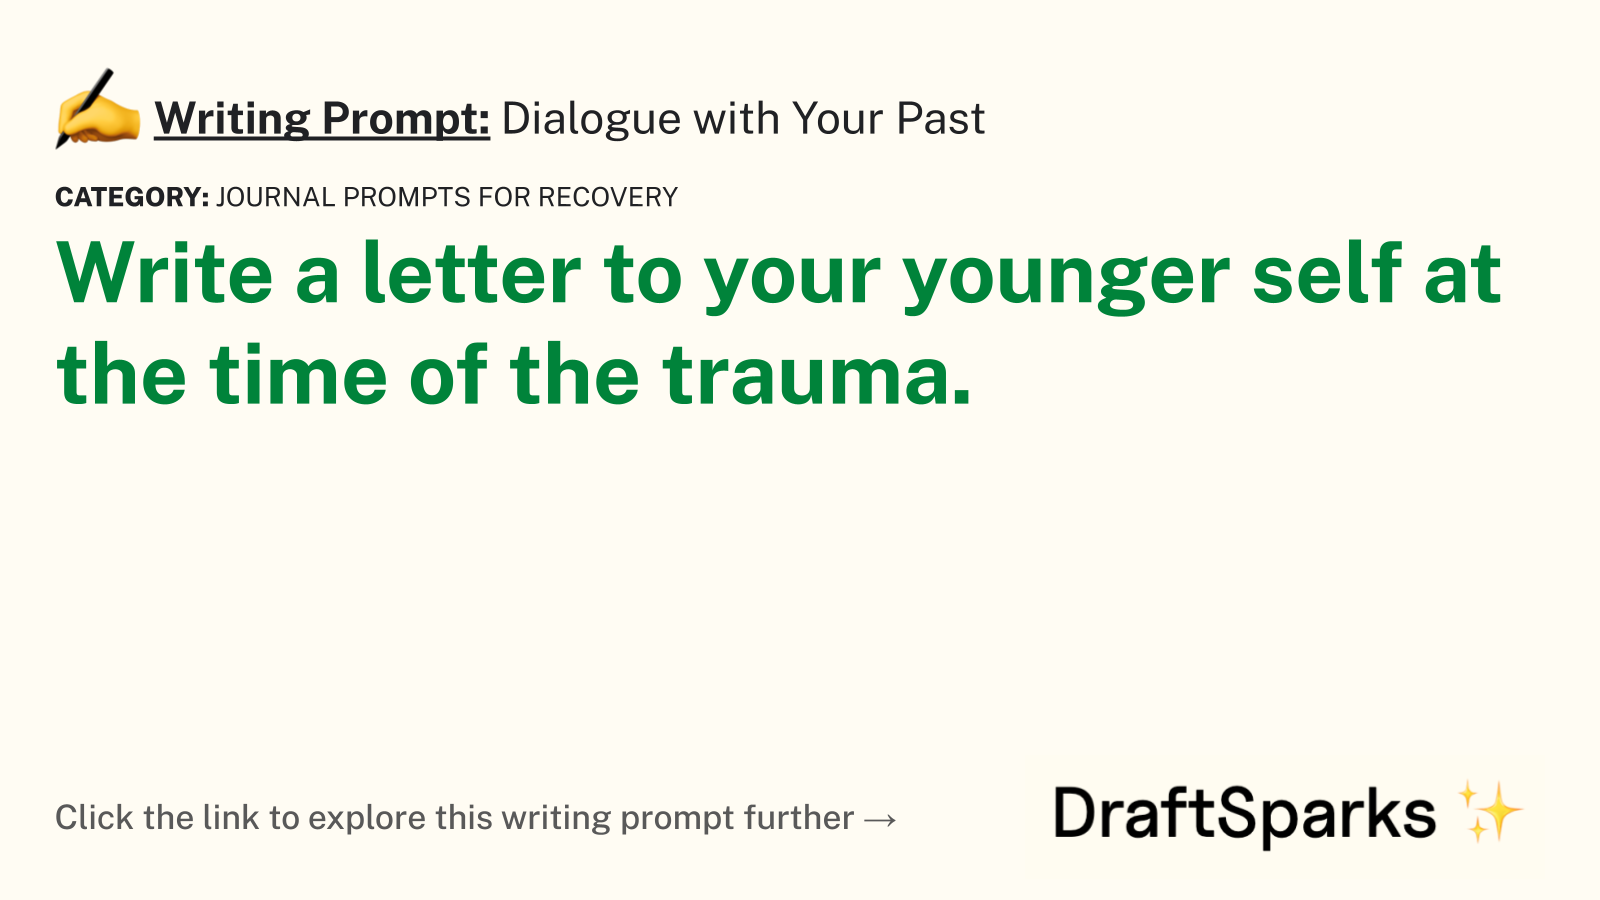 Dialogue with Your Past